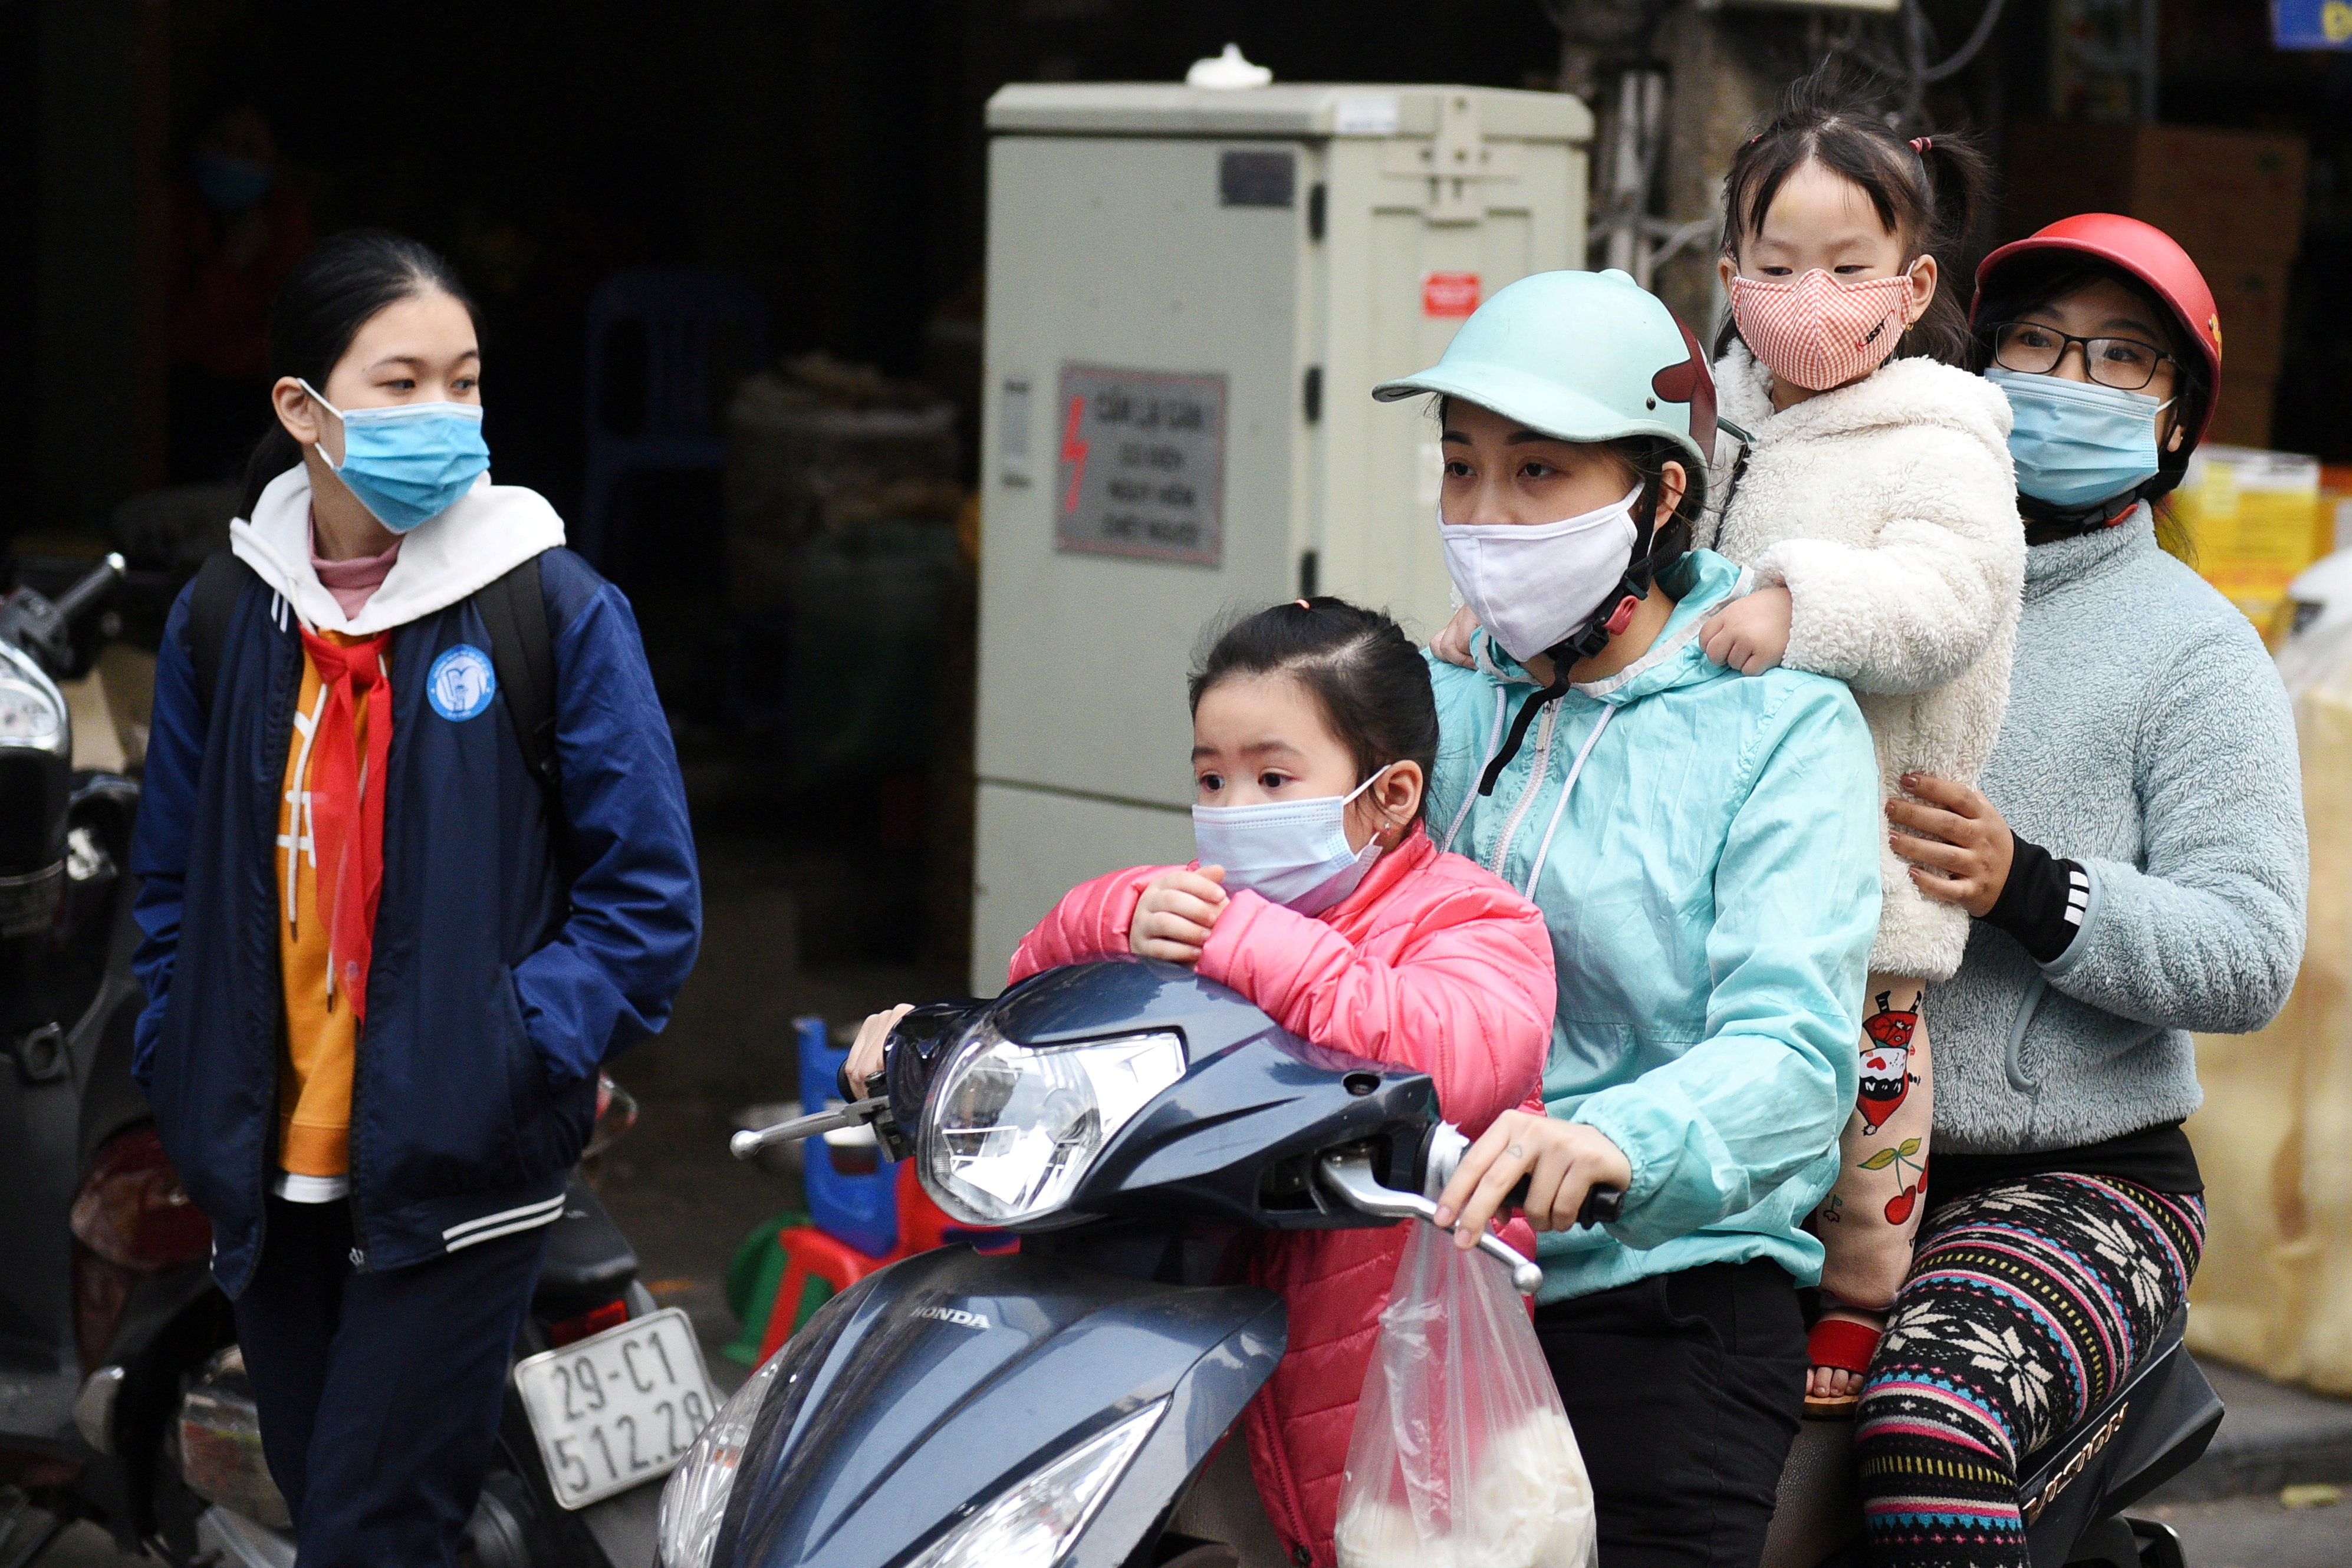 A family wears protective masks as they ride a motorbike in the street in Hanoi